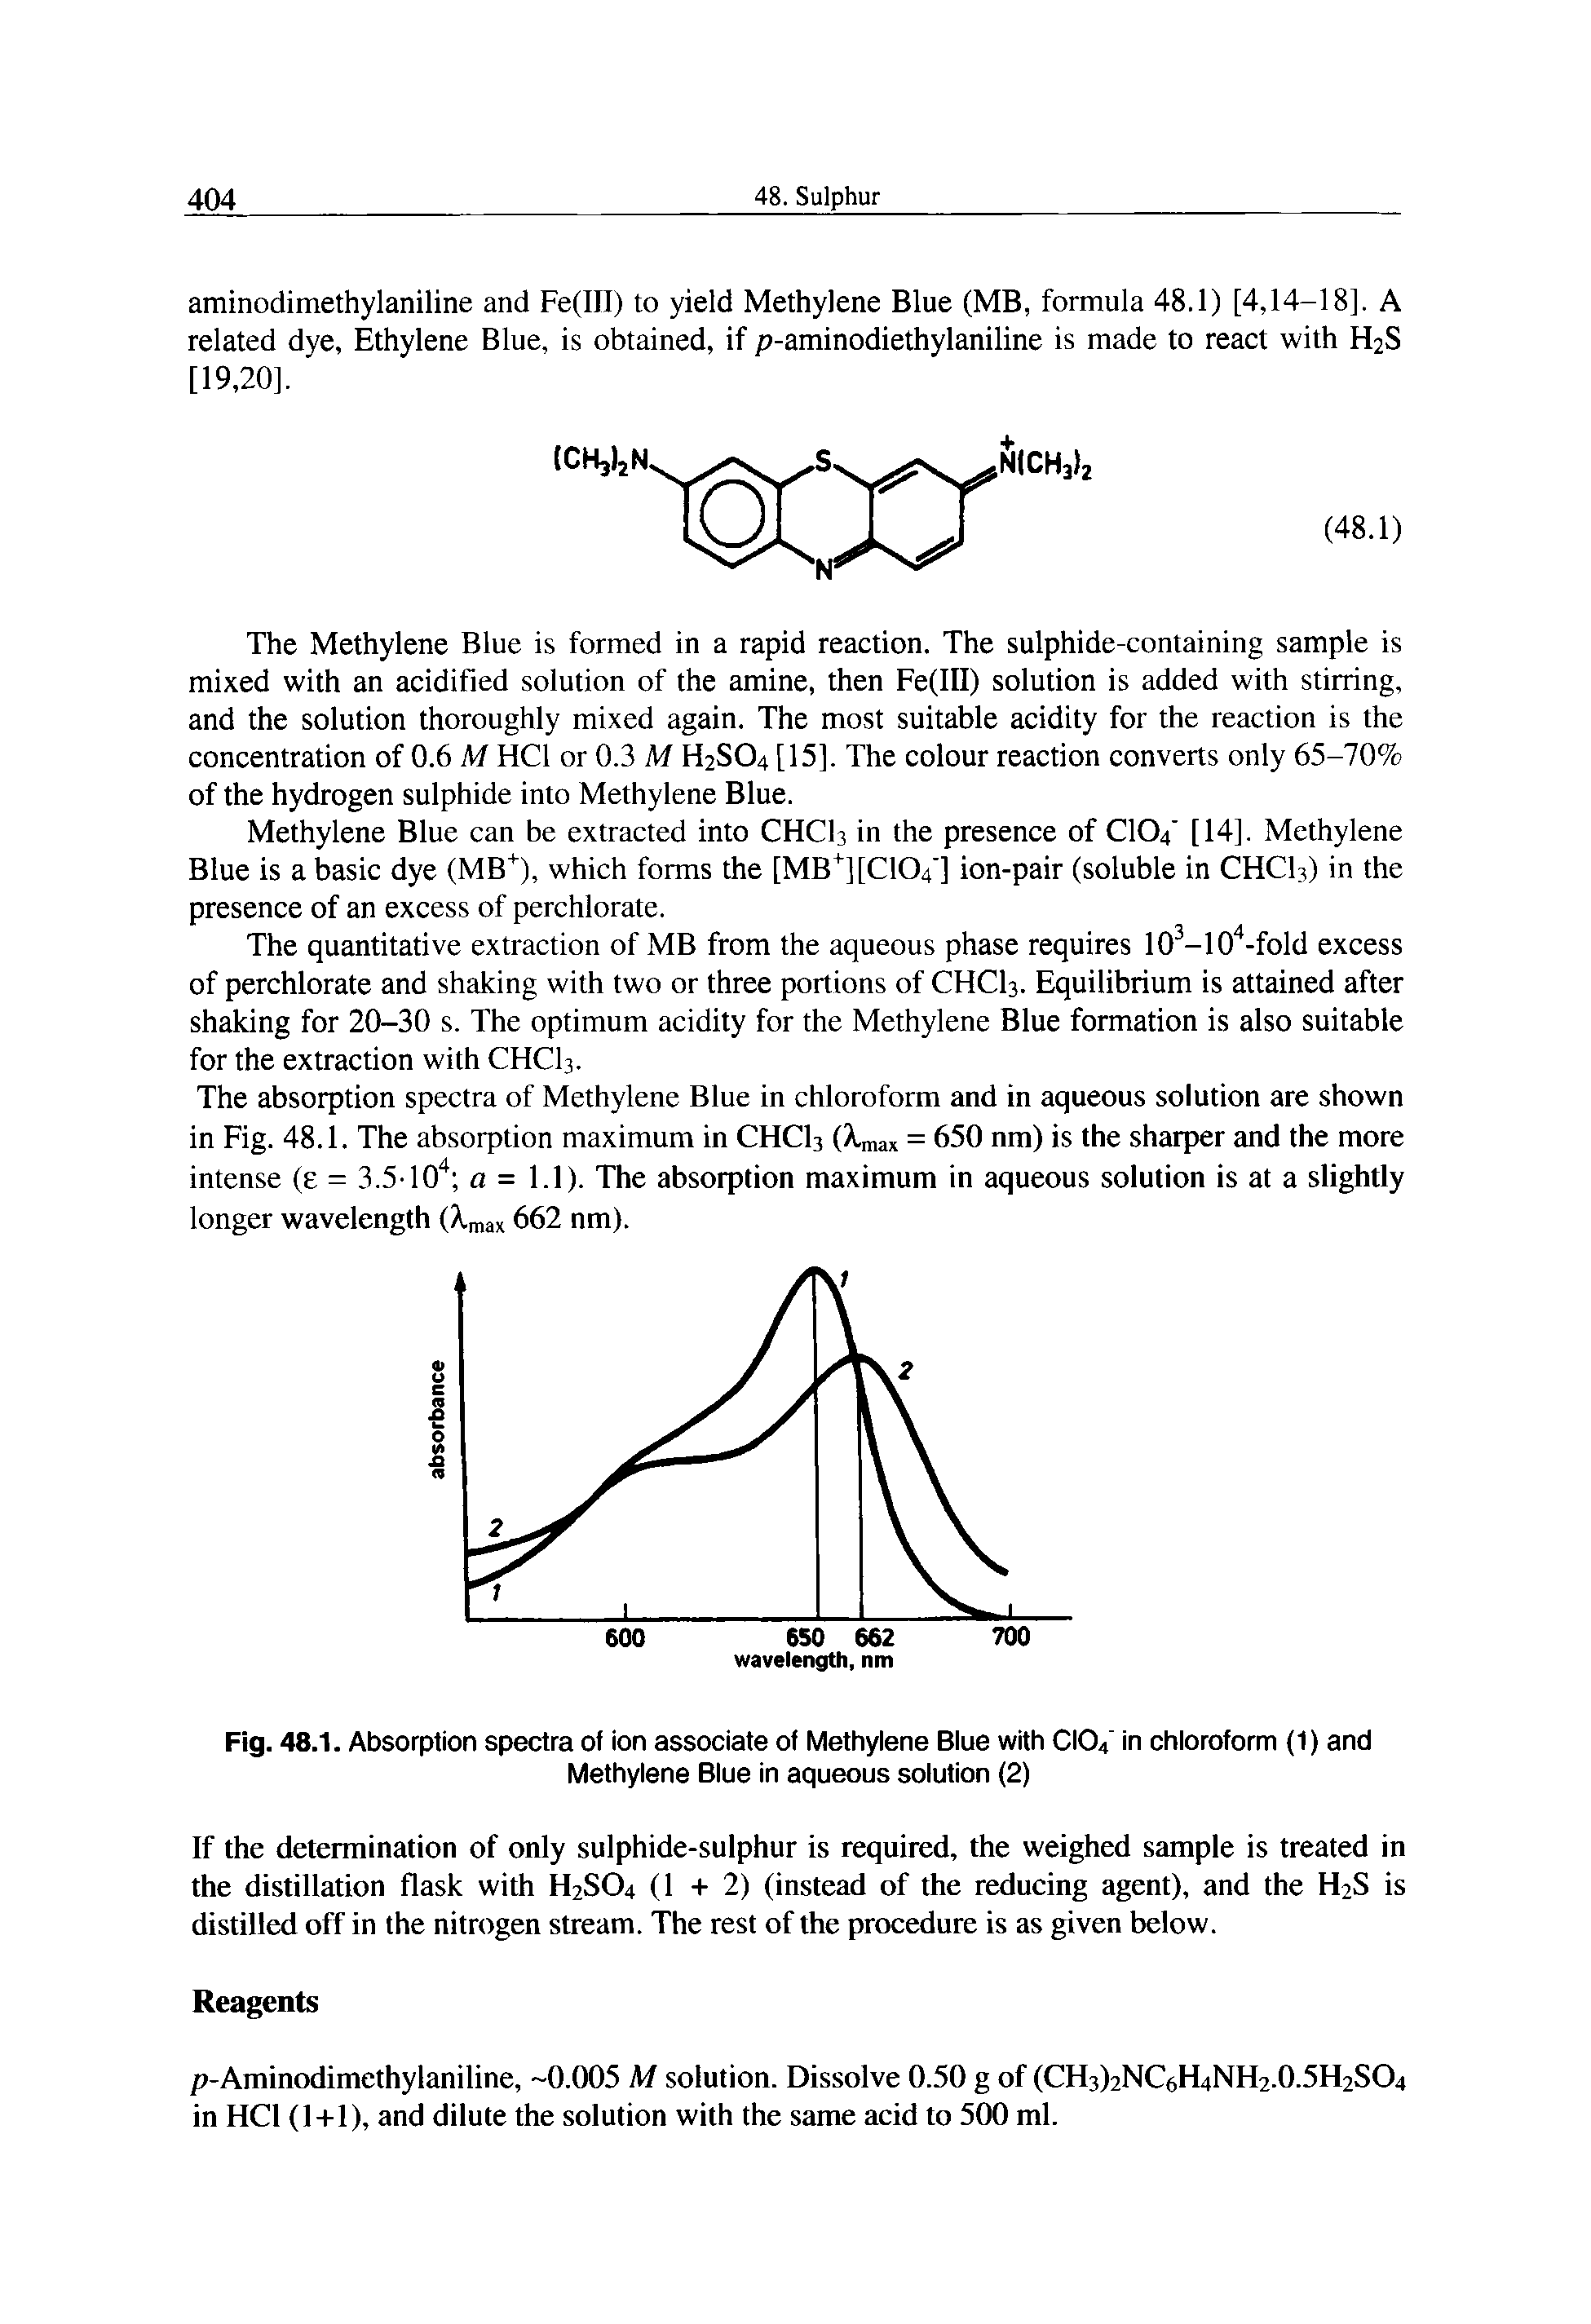 Fig. 48.1. Absorption spectra of ion associate of Methylene Blue with ClOf in chloroform (1) and Methylene Blue in aqueous solution (2)...